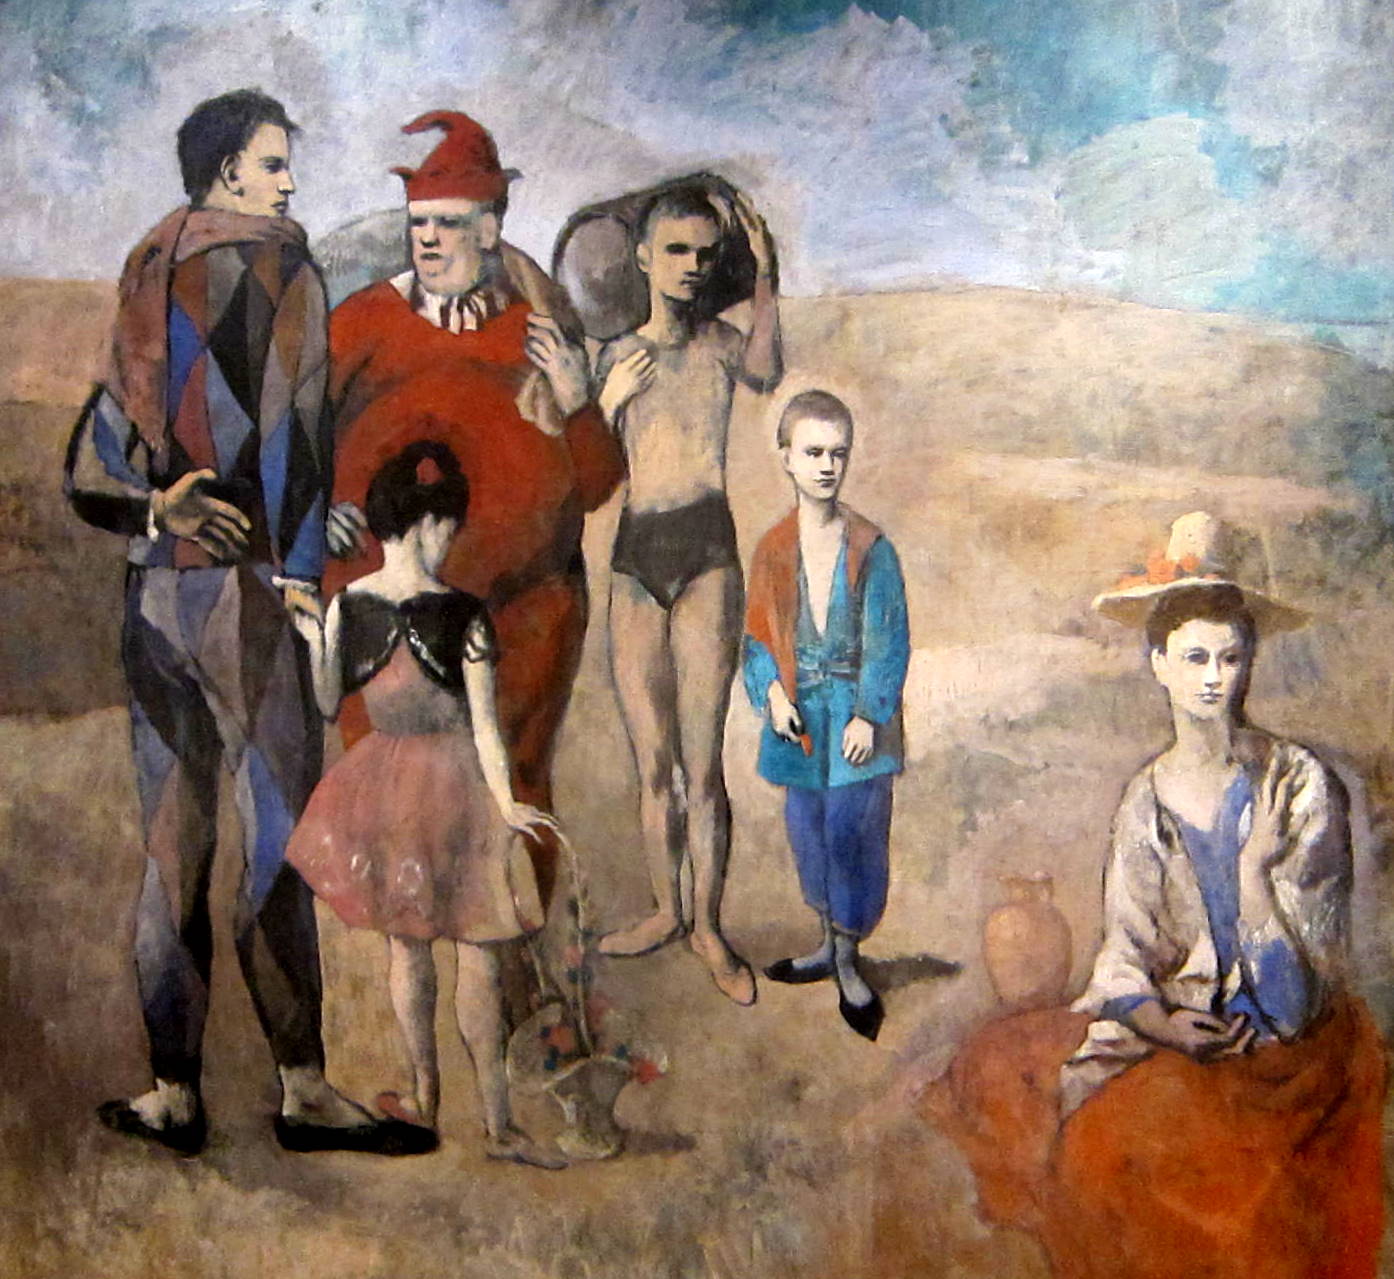 picasso-saltimbanques